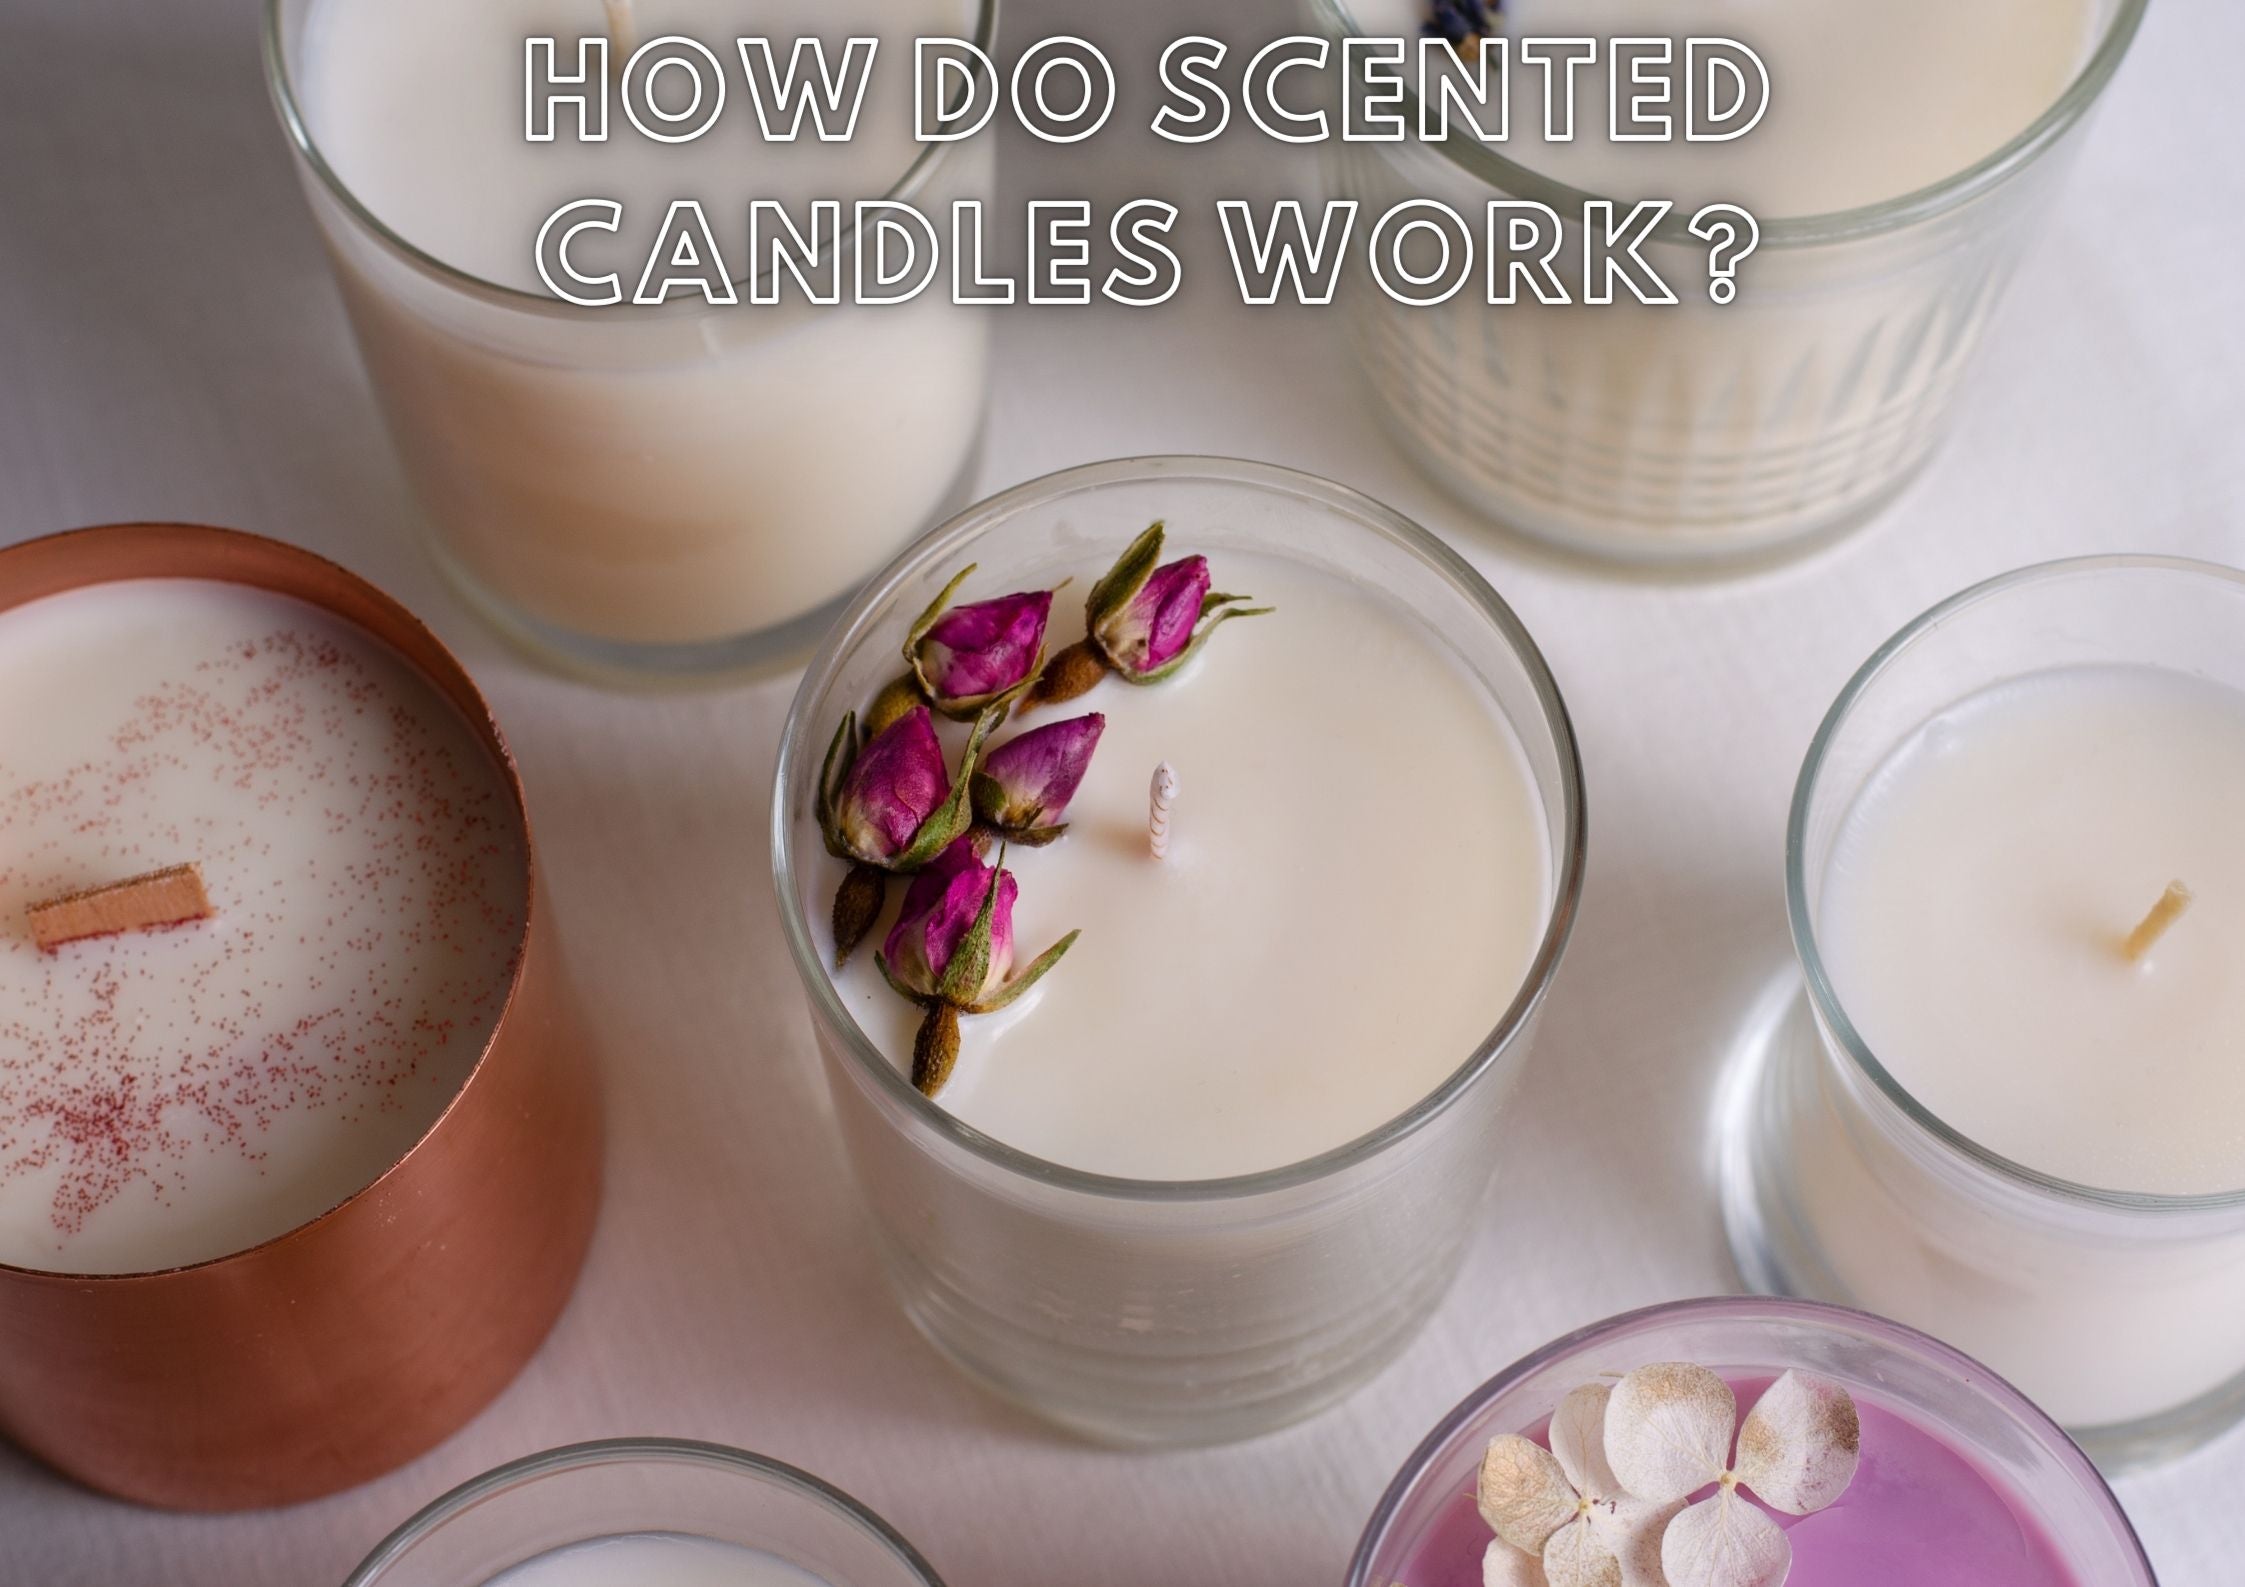 How do scented candles work?